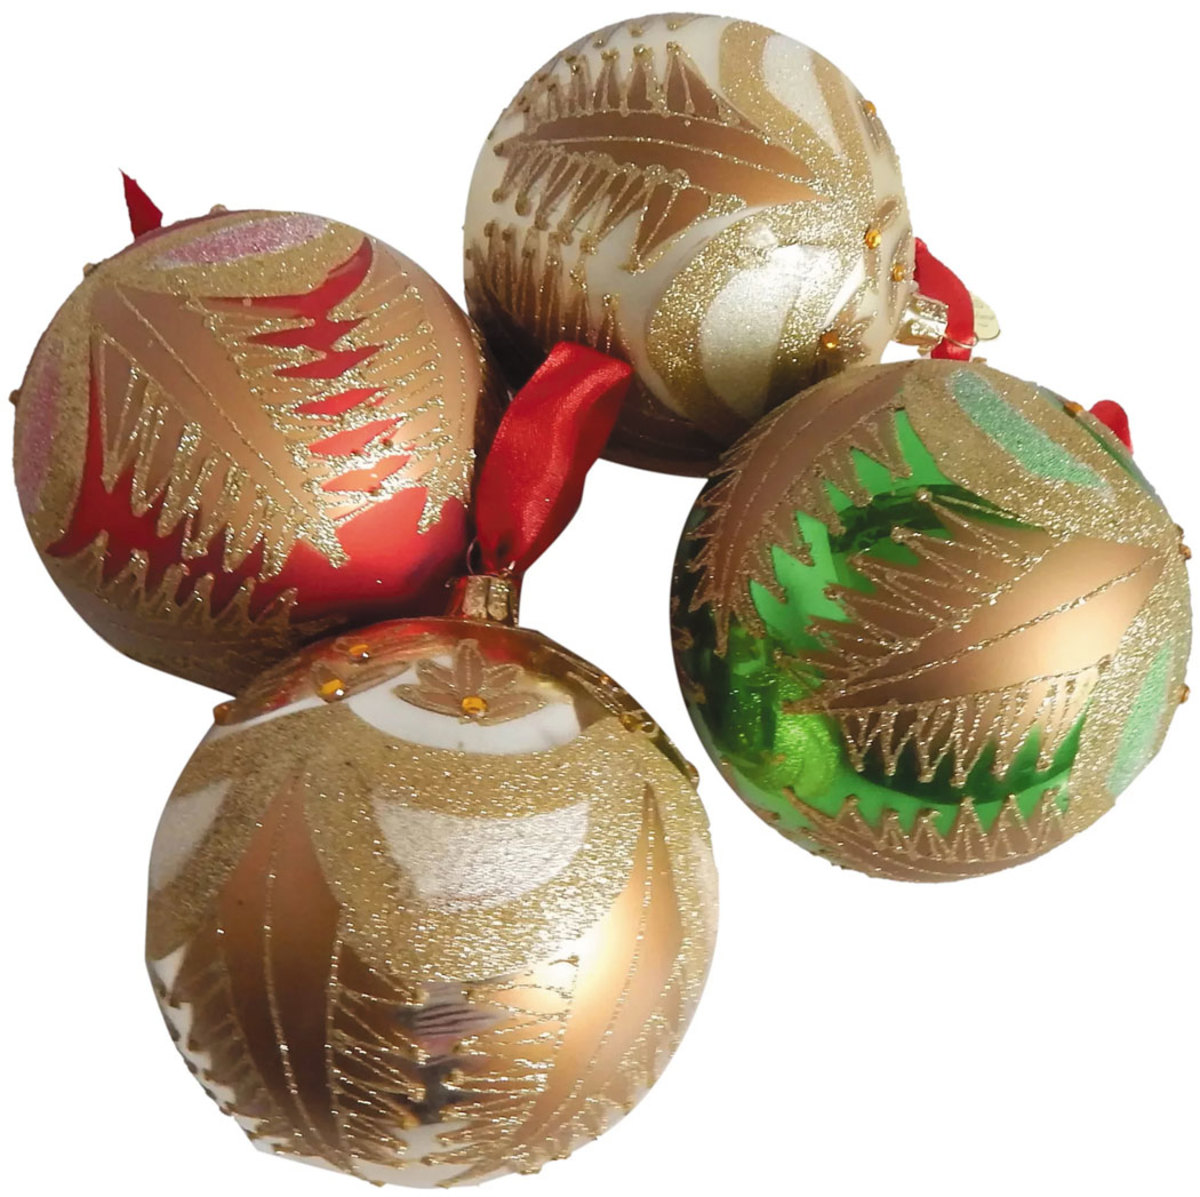 Waterford Holiday Heirlooms North Pole Collection ornaments